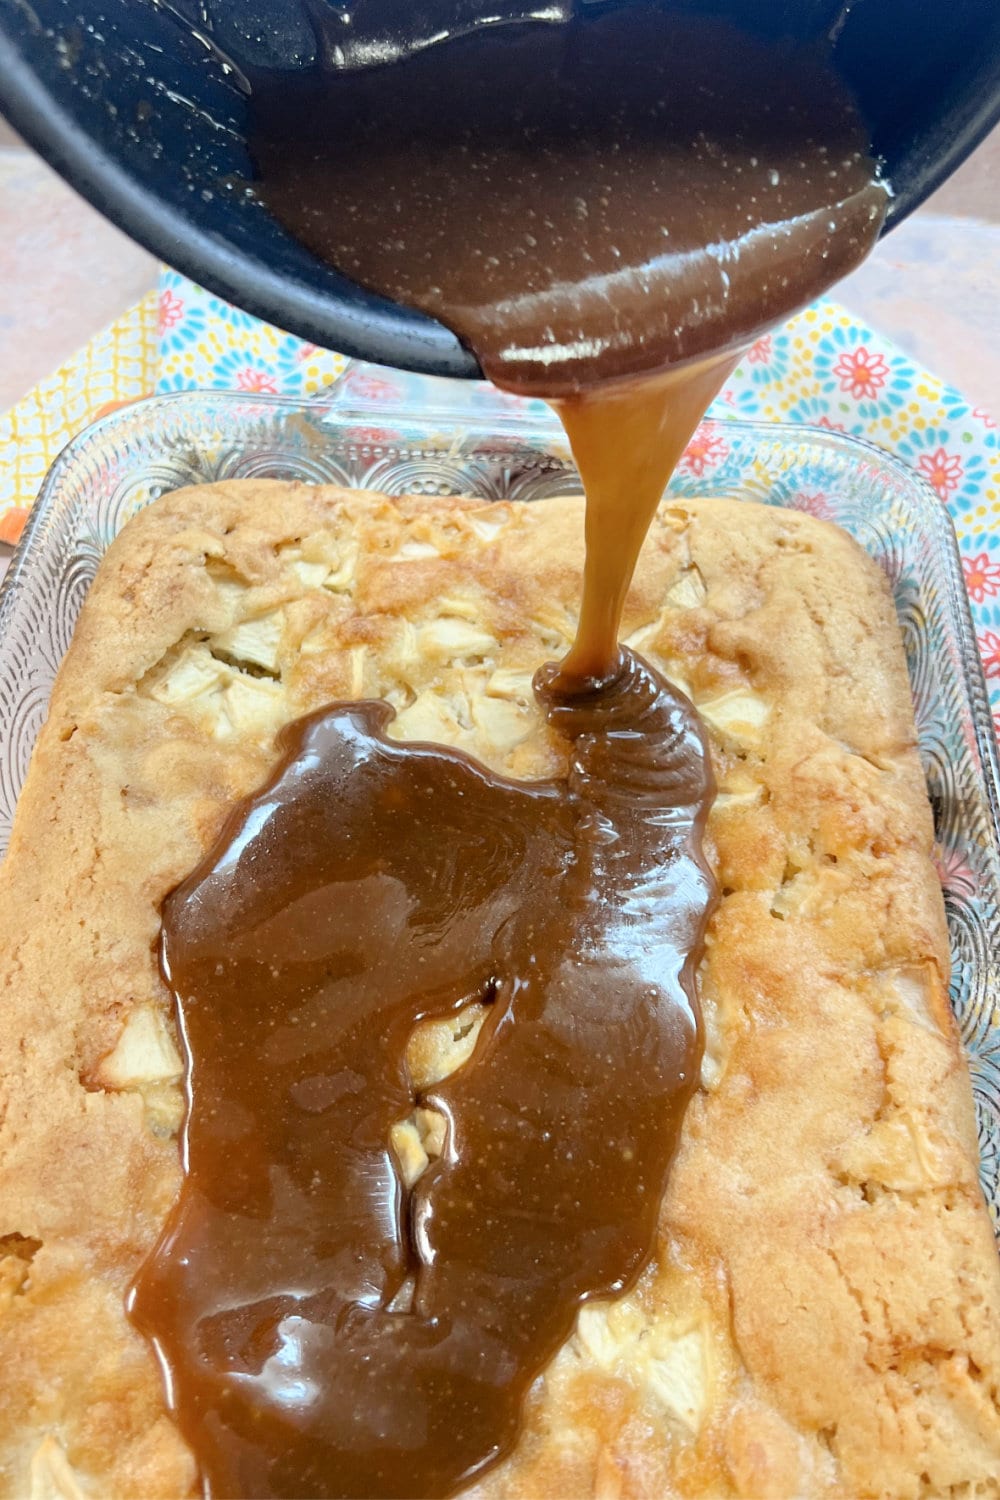 Pouring caramel sauce over the apple cake. 